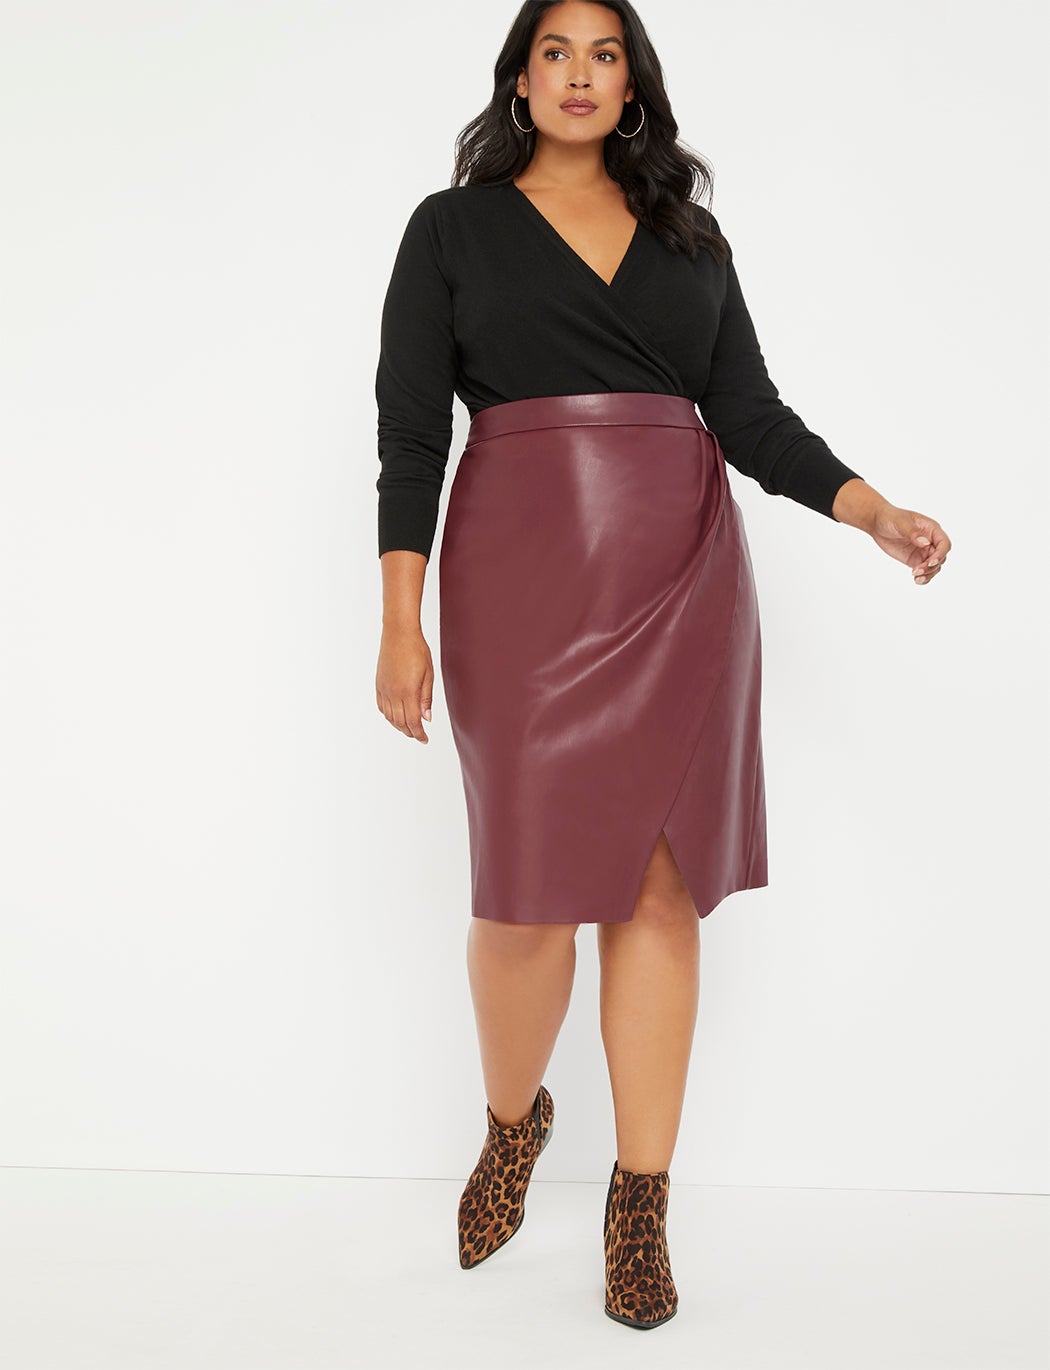 Leather Skirts Are IT This Season, Here Are Our Top Picks | Essence